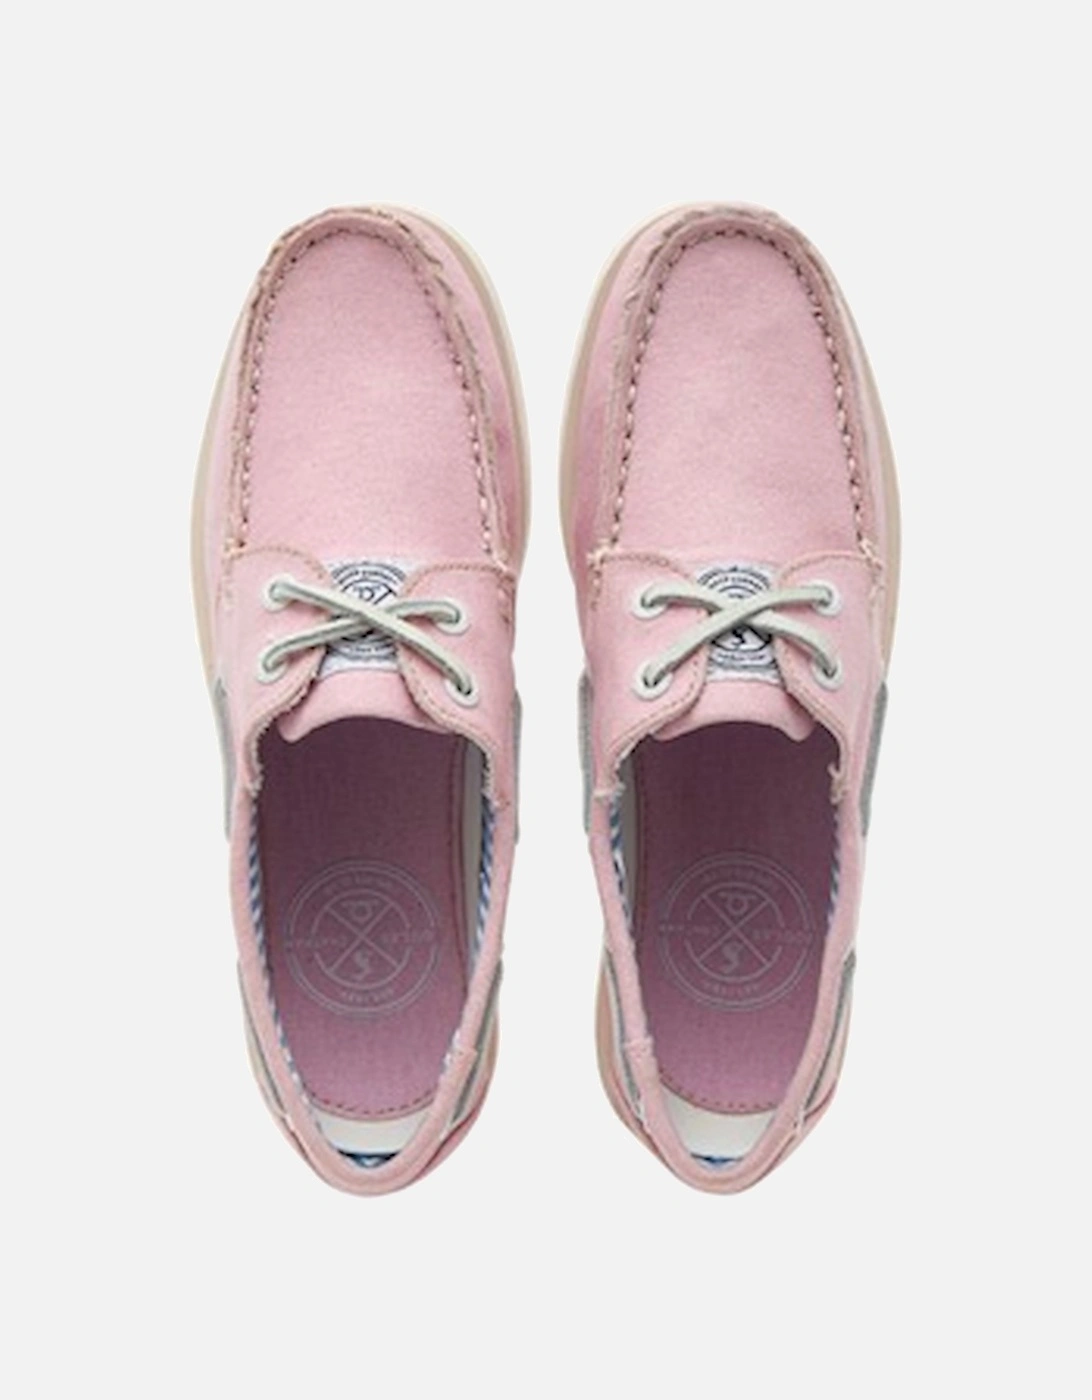 X Joules Women's Jetty Lady Canvas Boat Shoes Pink